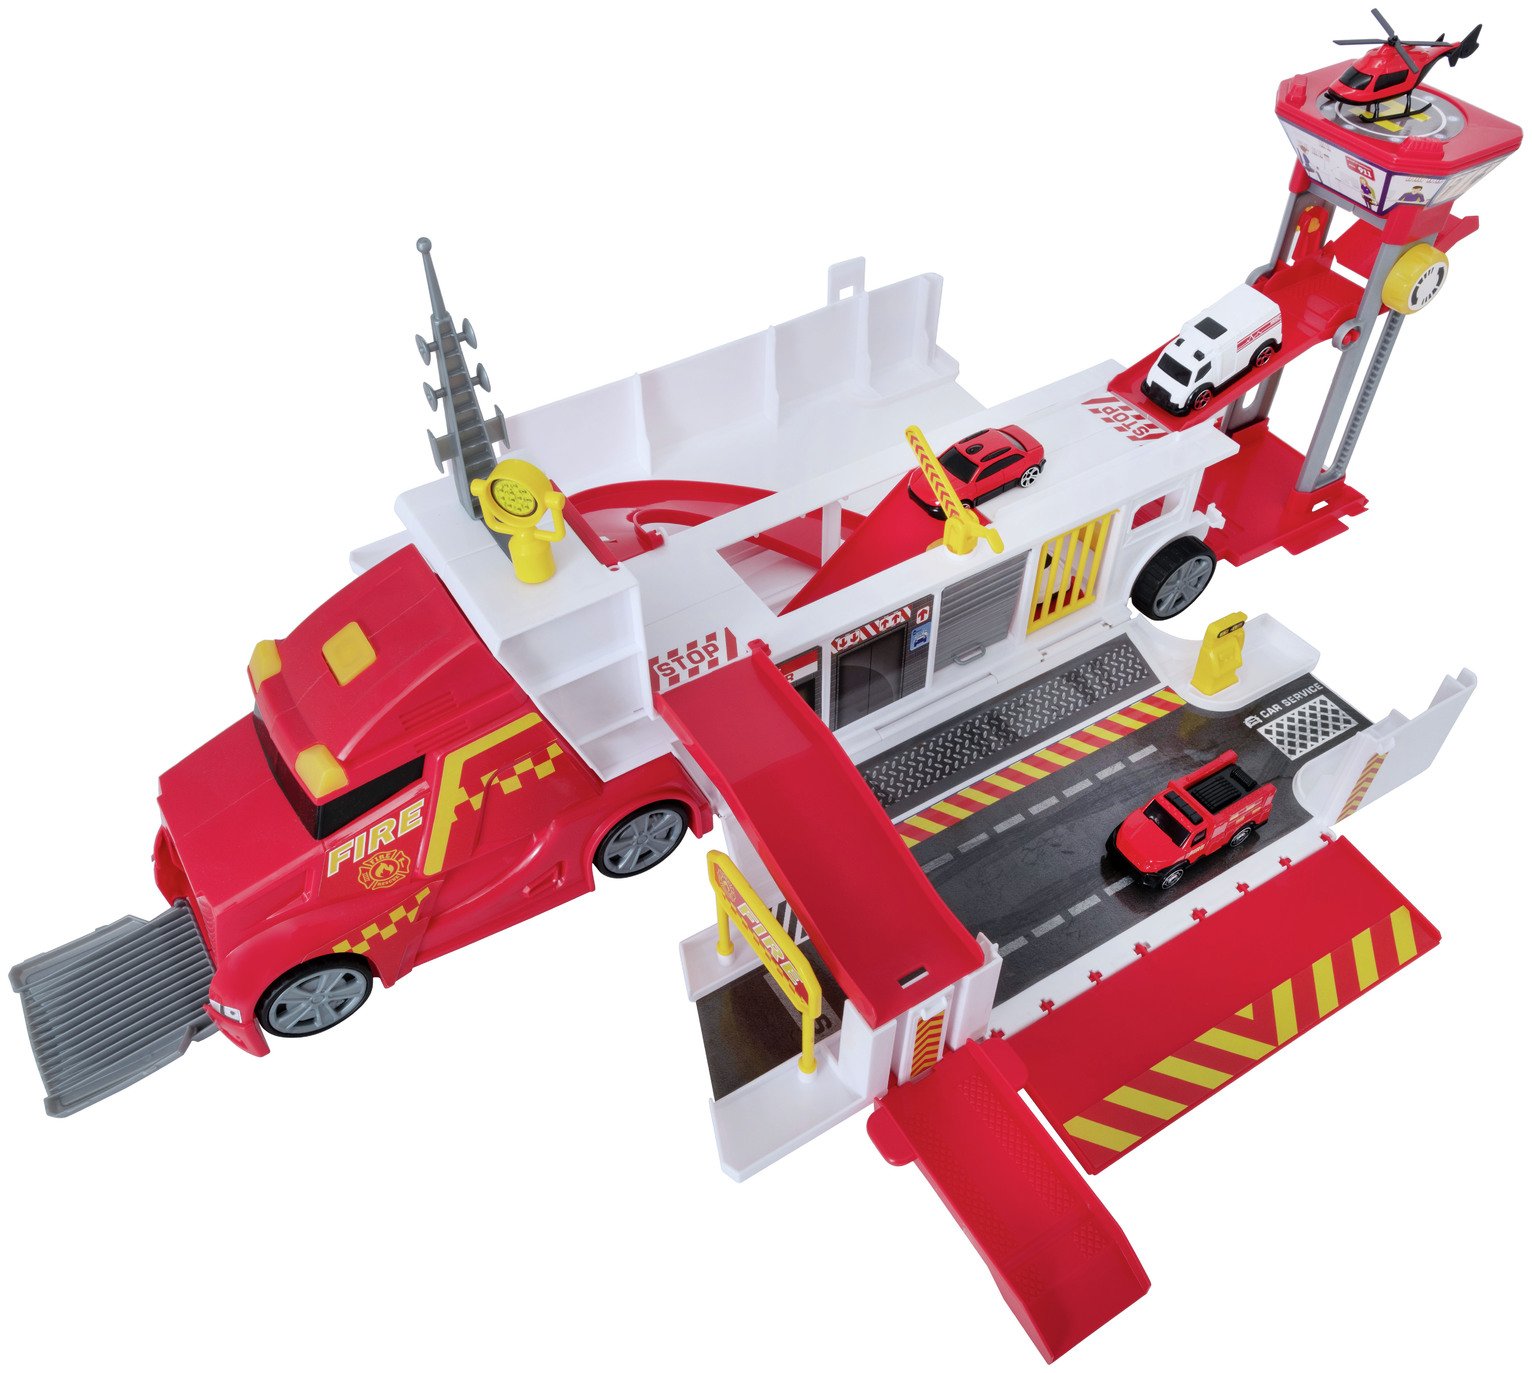 Teamsterz Fire Command Truck Playset